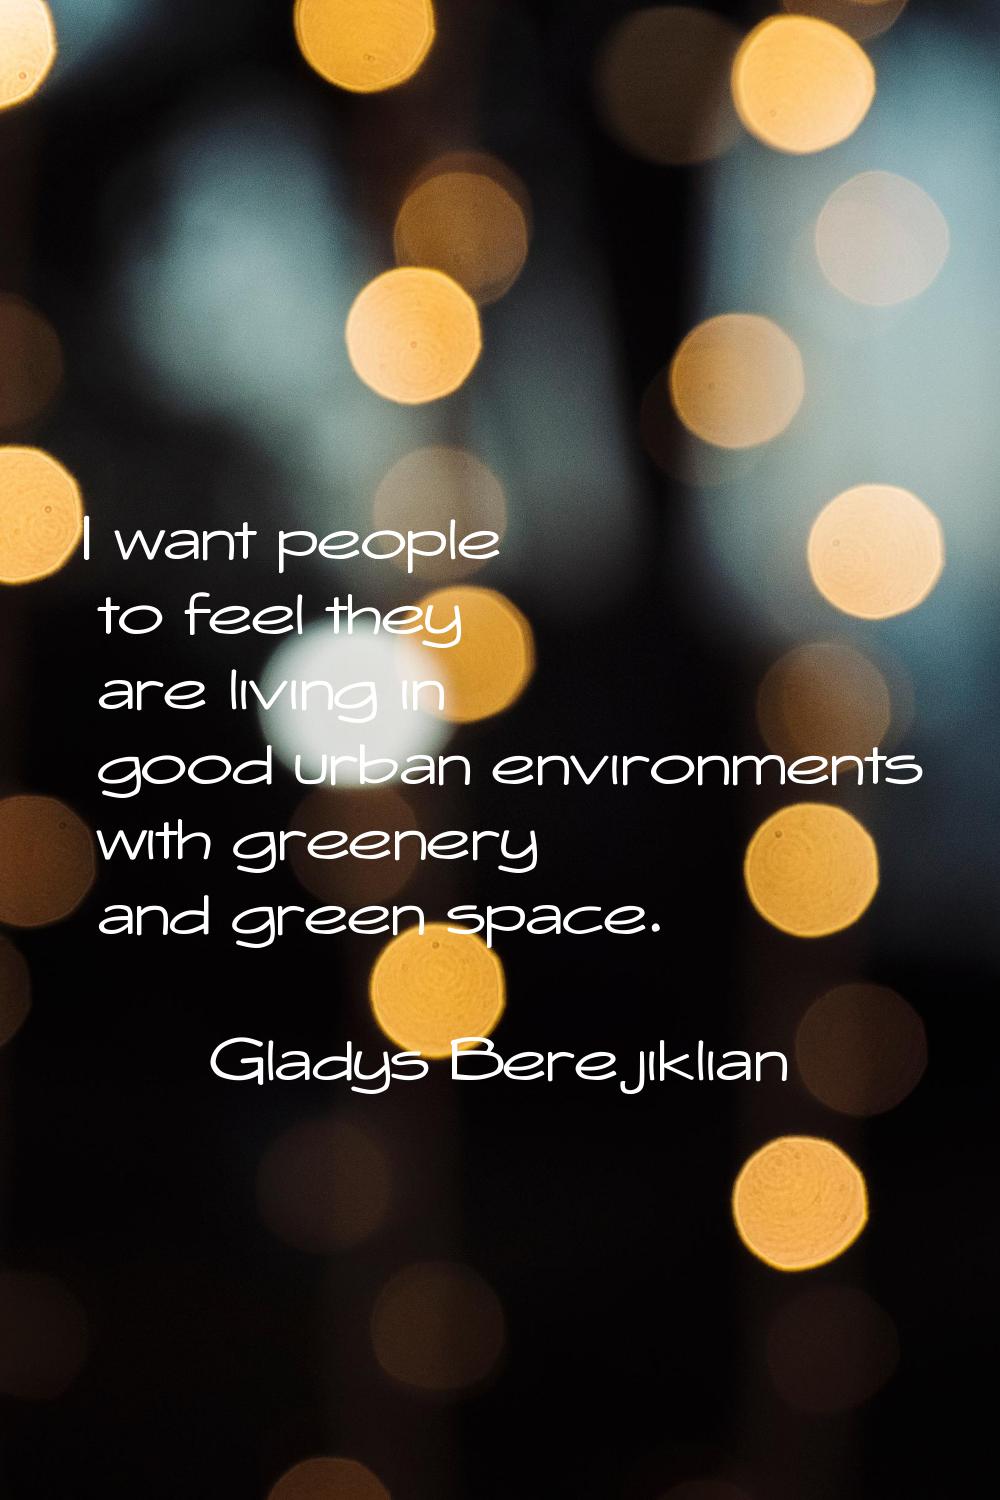 I want people to feel they are living in good urban environments with greenery and green space.